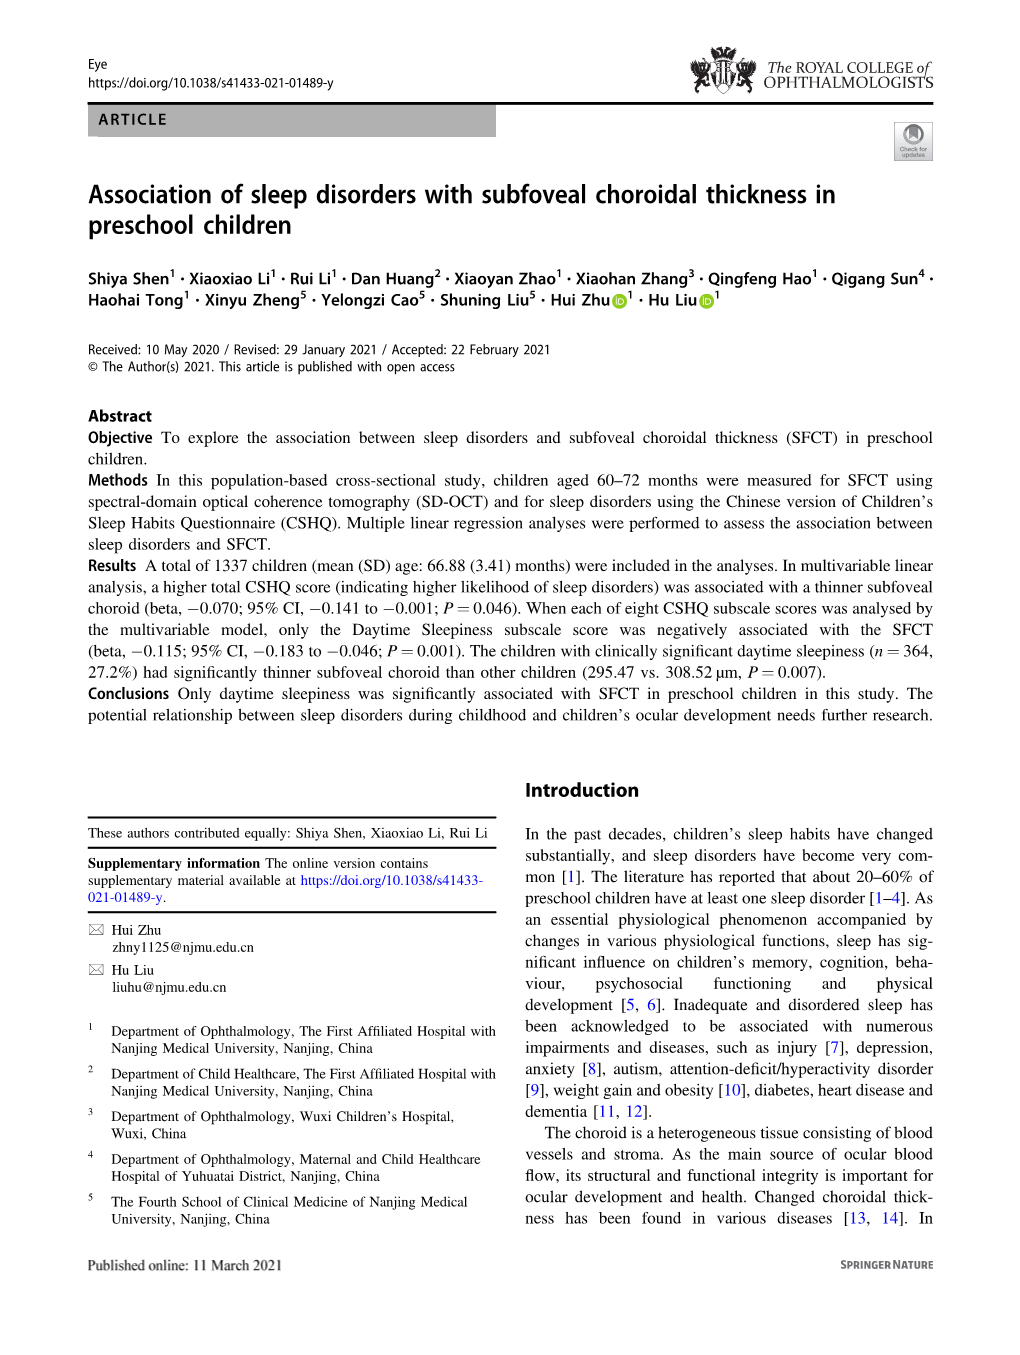 Association of Sleep Disorders with Subfoveal Choroidal Thickness in Preschool Children